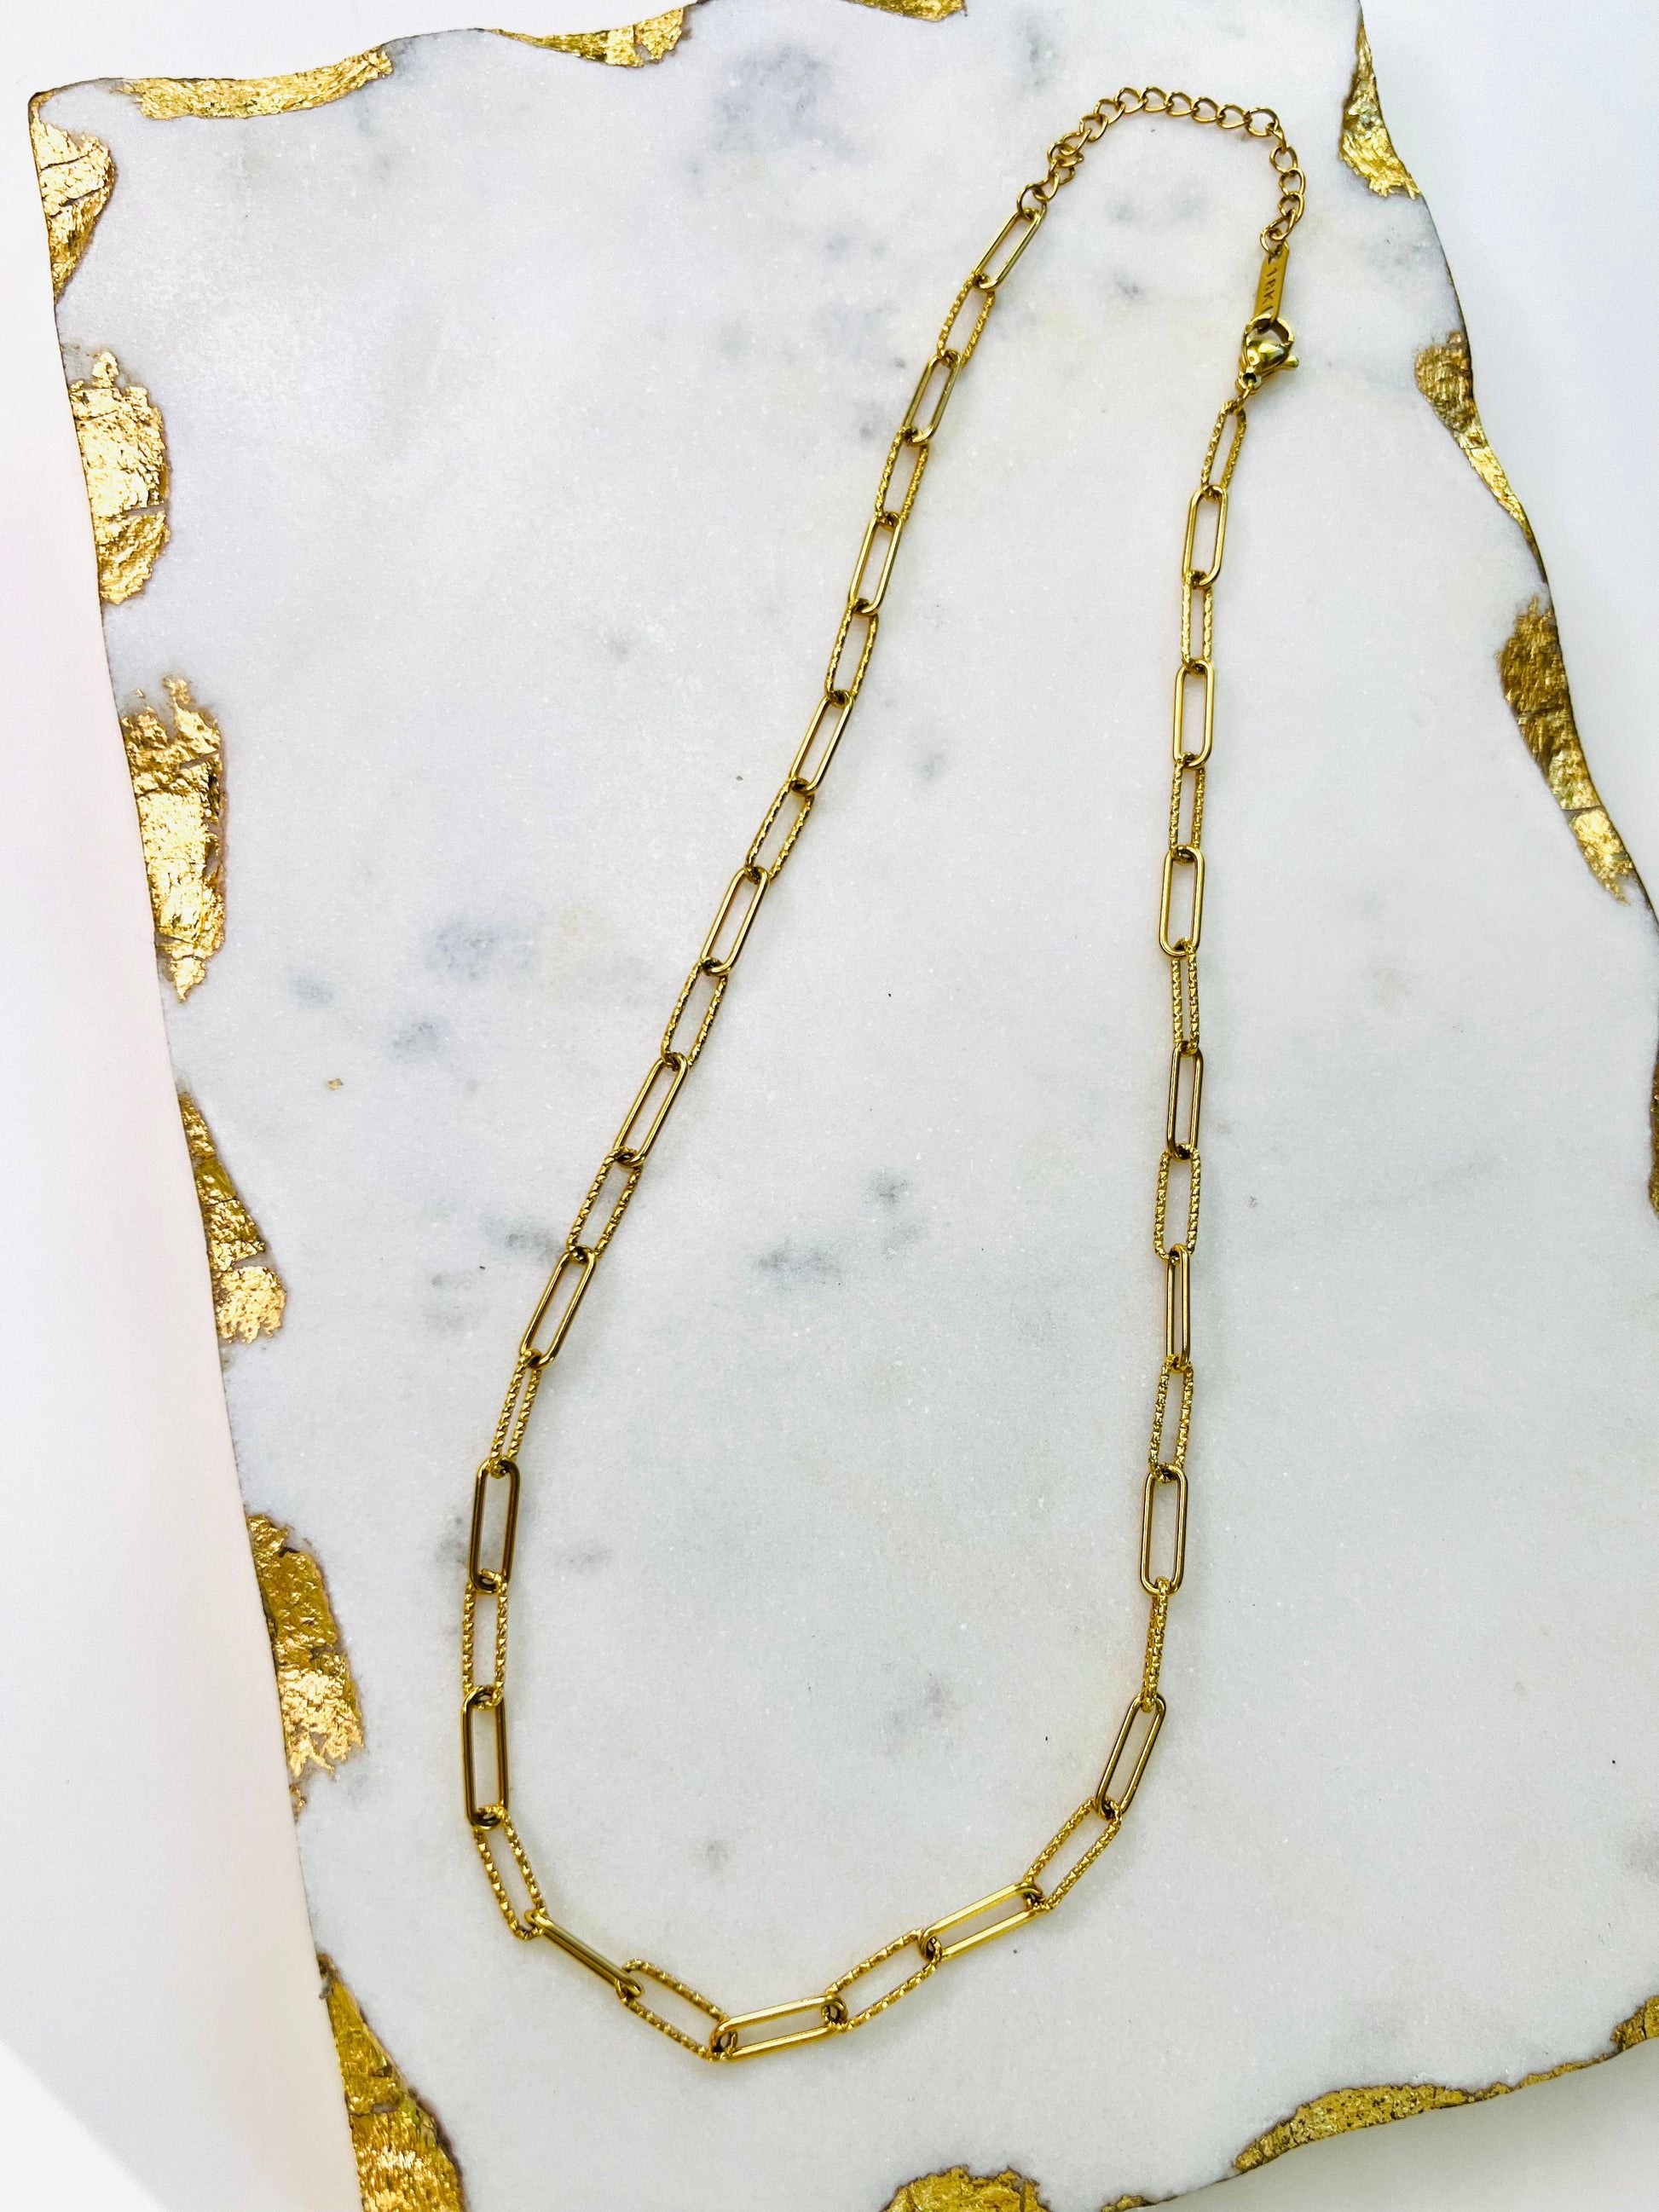 An Alex Link Necklace by Lacey Rae Jewelry on a marble surface.